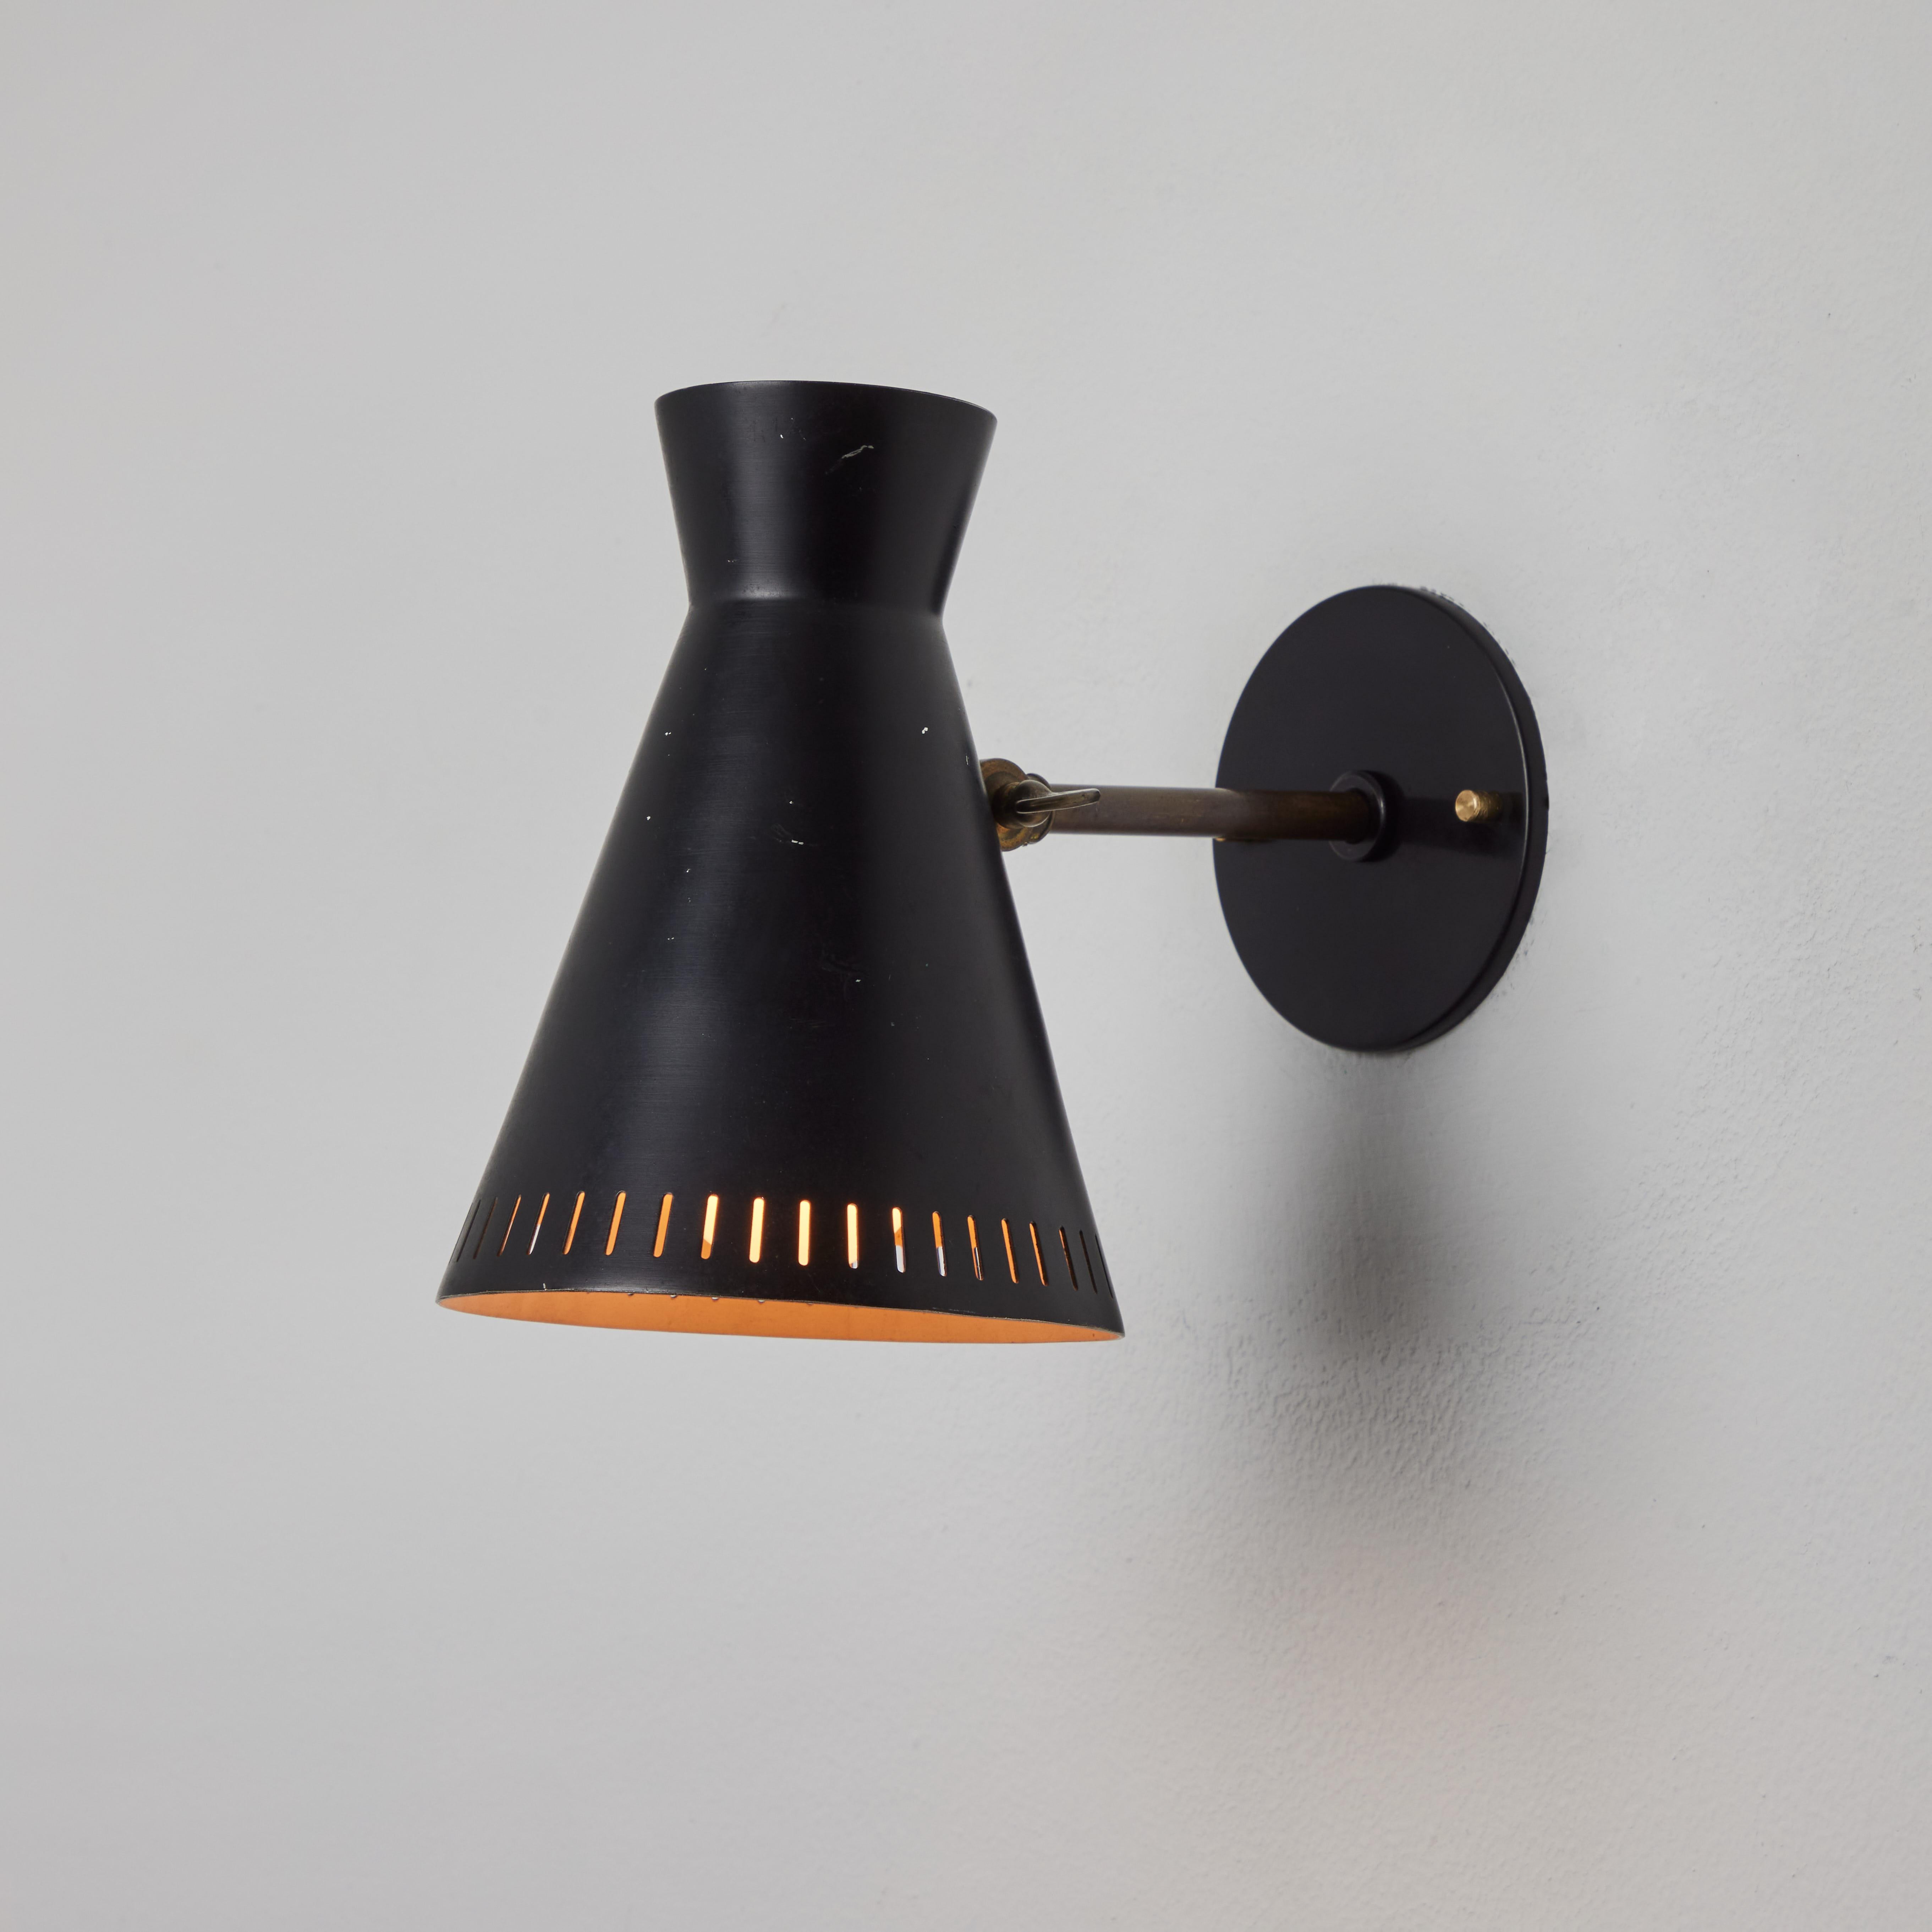 1950s Perforated Black Metal Diabolo Wall Lamp Attributed to Mauri Almari In Good Condition For Sale In Glendale, CA